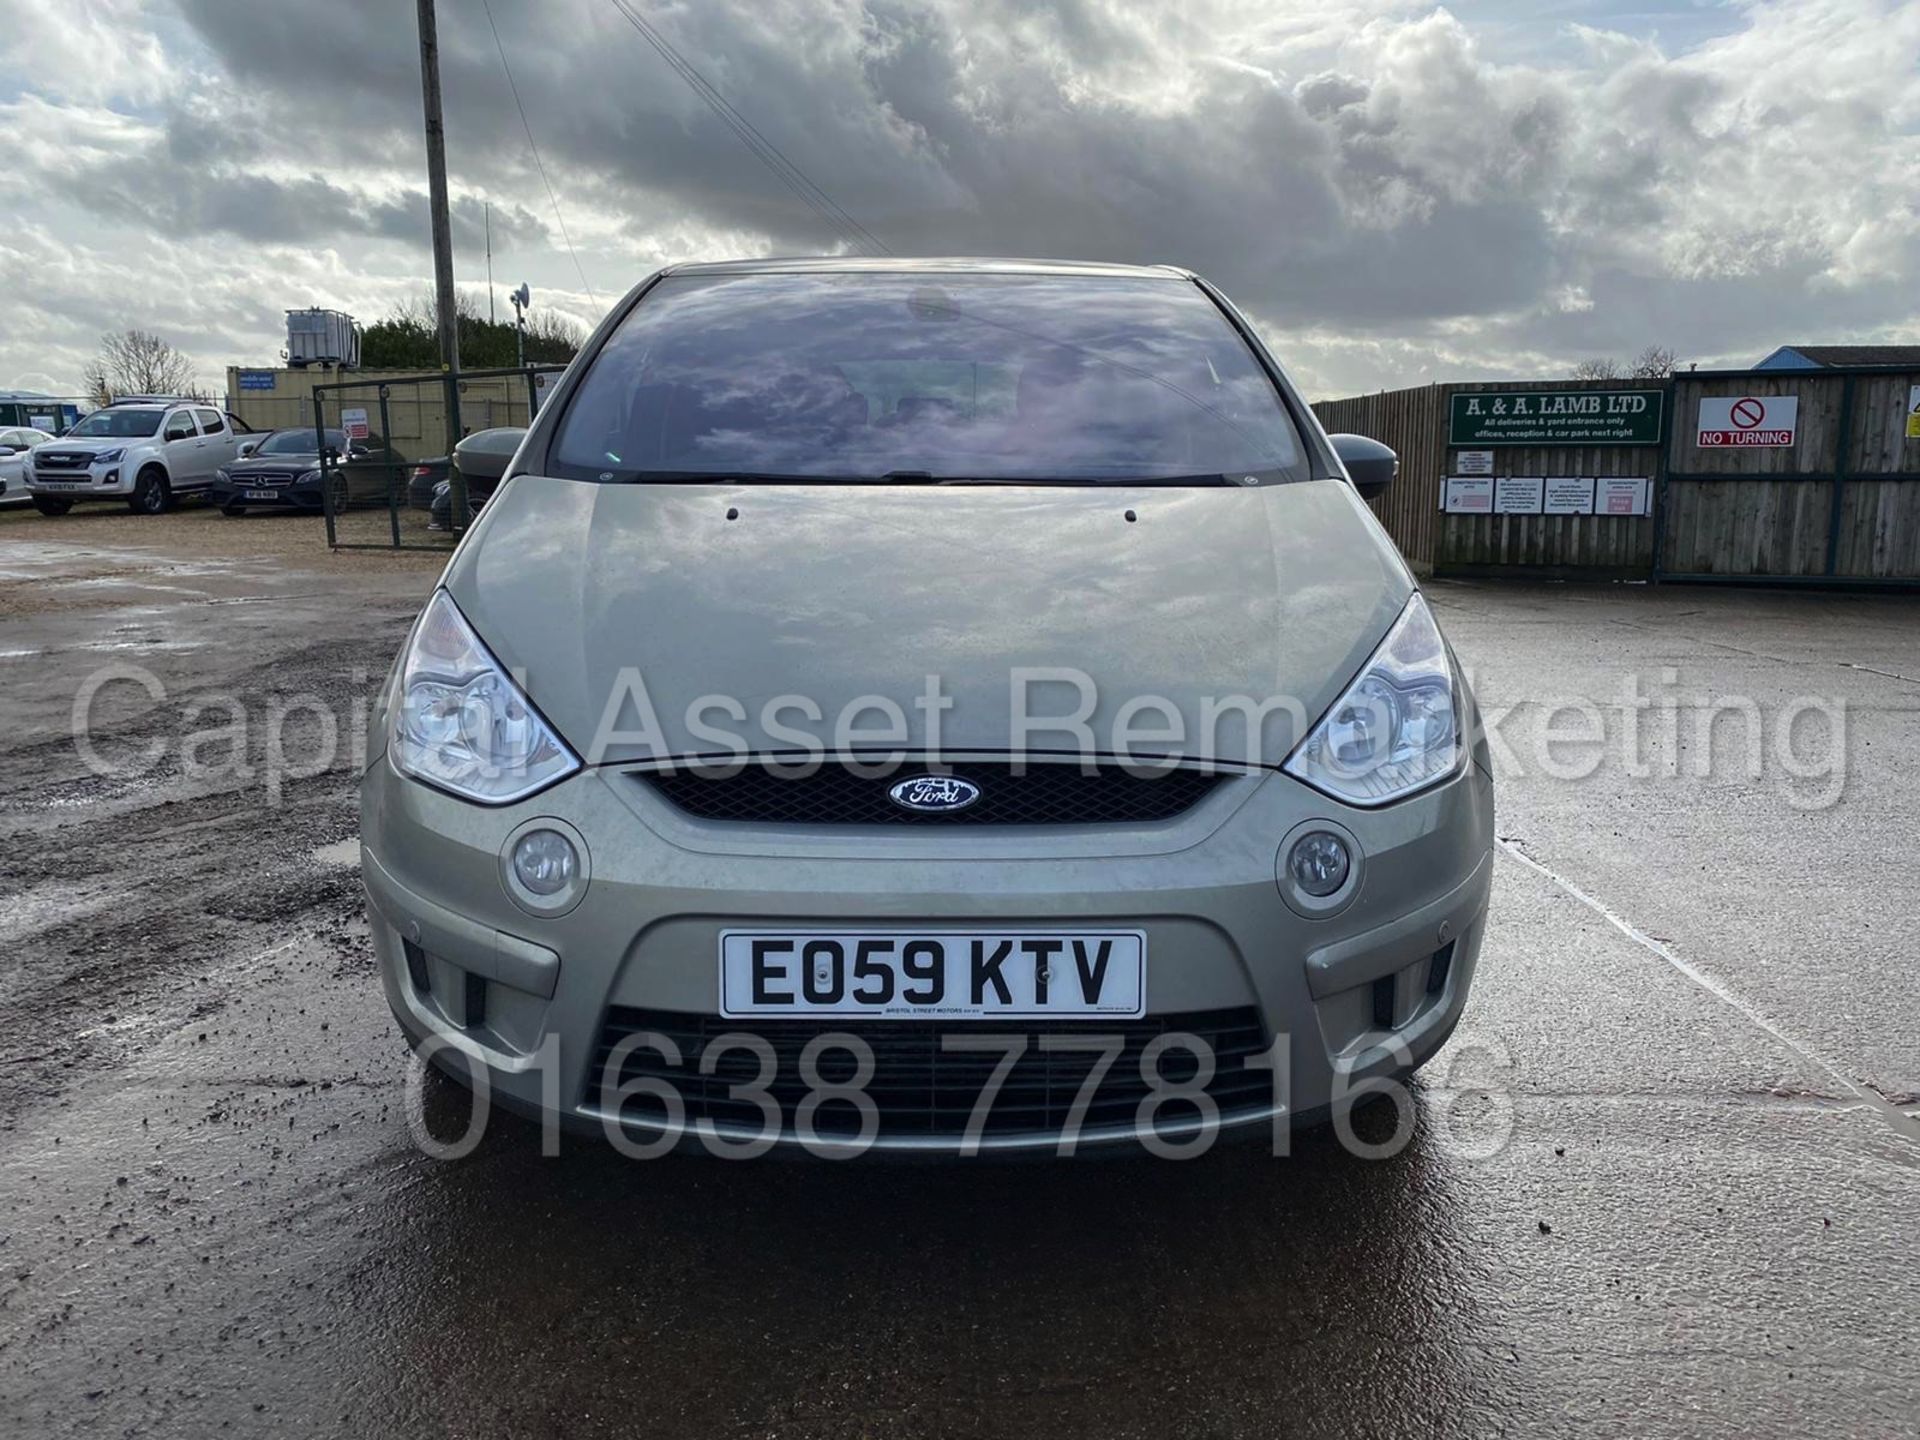 (On Sale) FORD S-MAX *ZETEC EDITION* 7 SEATER MPV (2010 MODEL) '1.8 TDCI - 6 SPEED' *A/C* (NO VAT) - Image 2 of 16